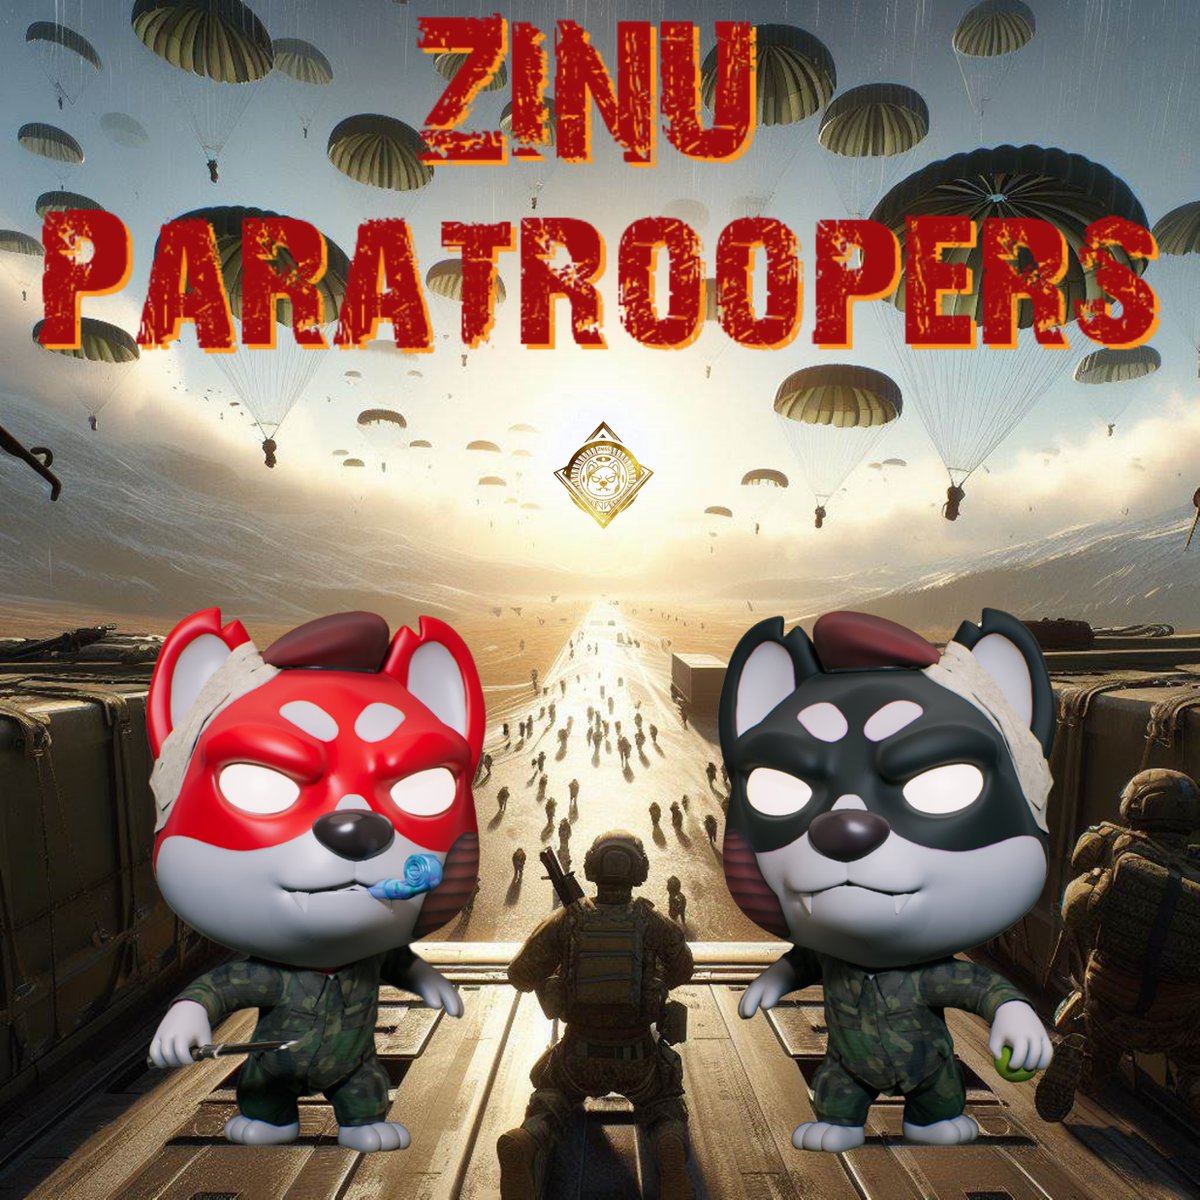 🔥 Grabbed my second #ZINU #Paratrooper! Only 10 in the collection of 10,000 w/both a maroon beret & camo!

🎖️ The ZINU community has a strong #veteran presence!

🪖 The #NFT collection has several #military traits!

🔗 wearezinu.com

#veteransincrypto #ZMSS #mainnetz